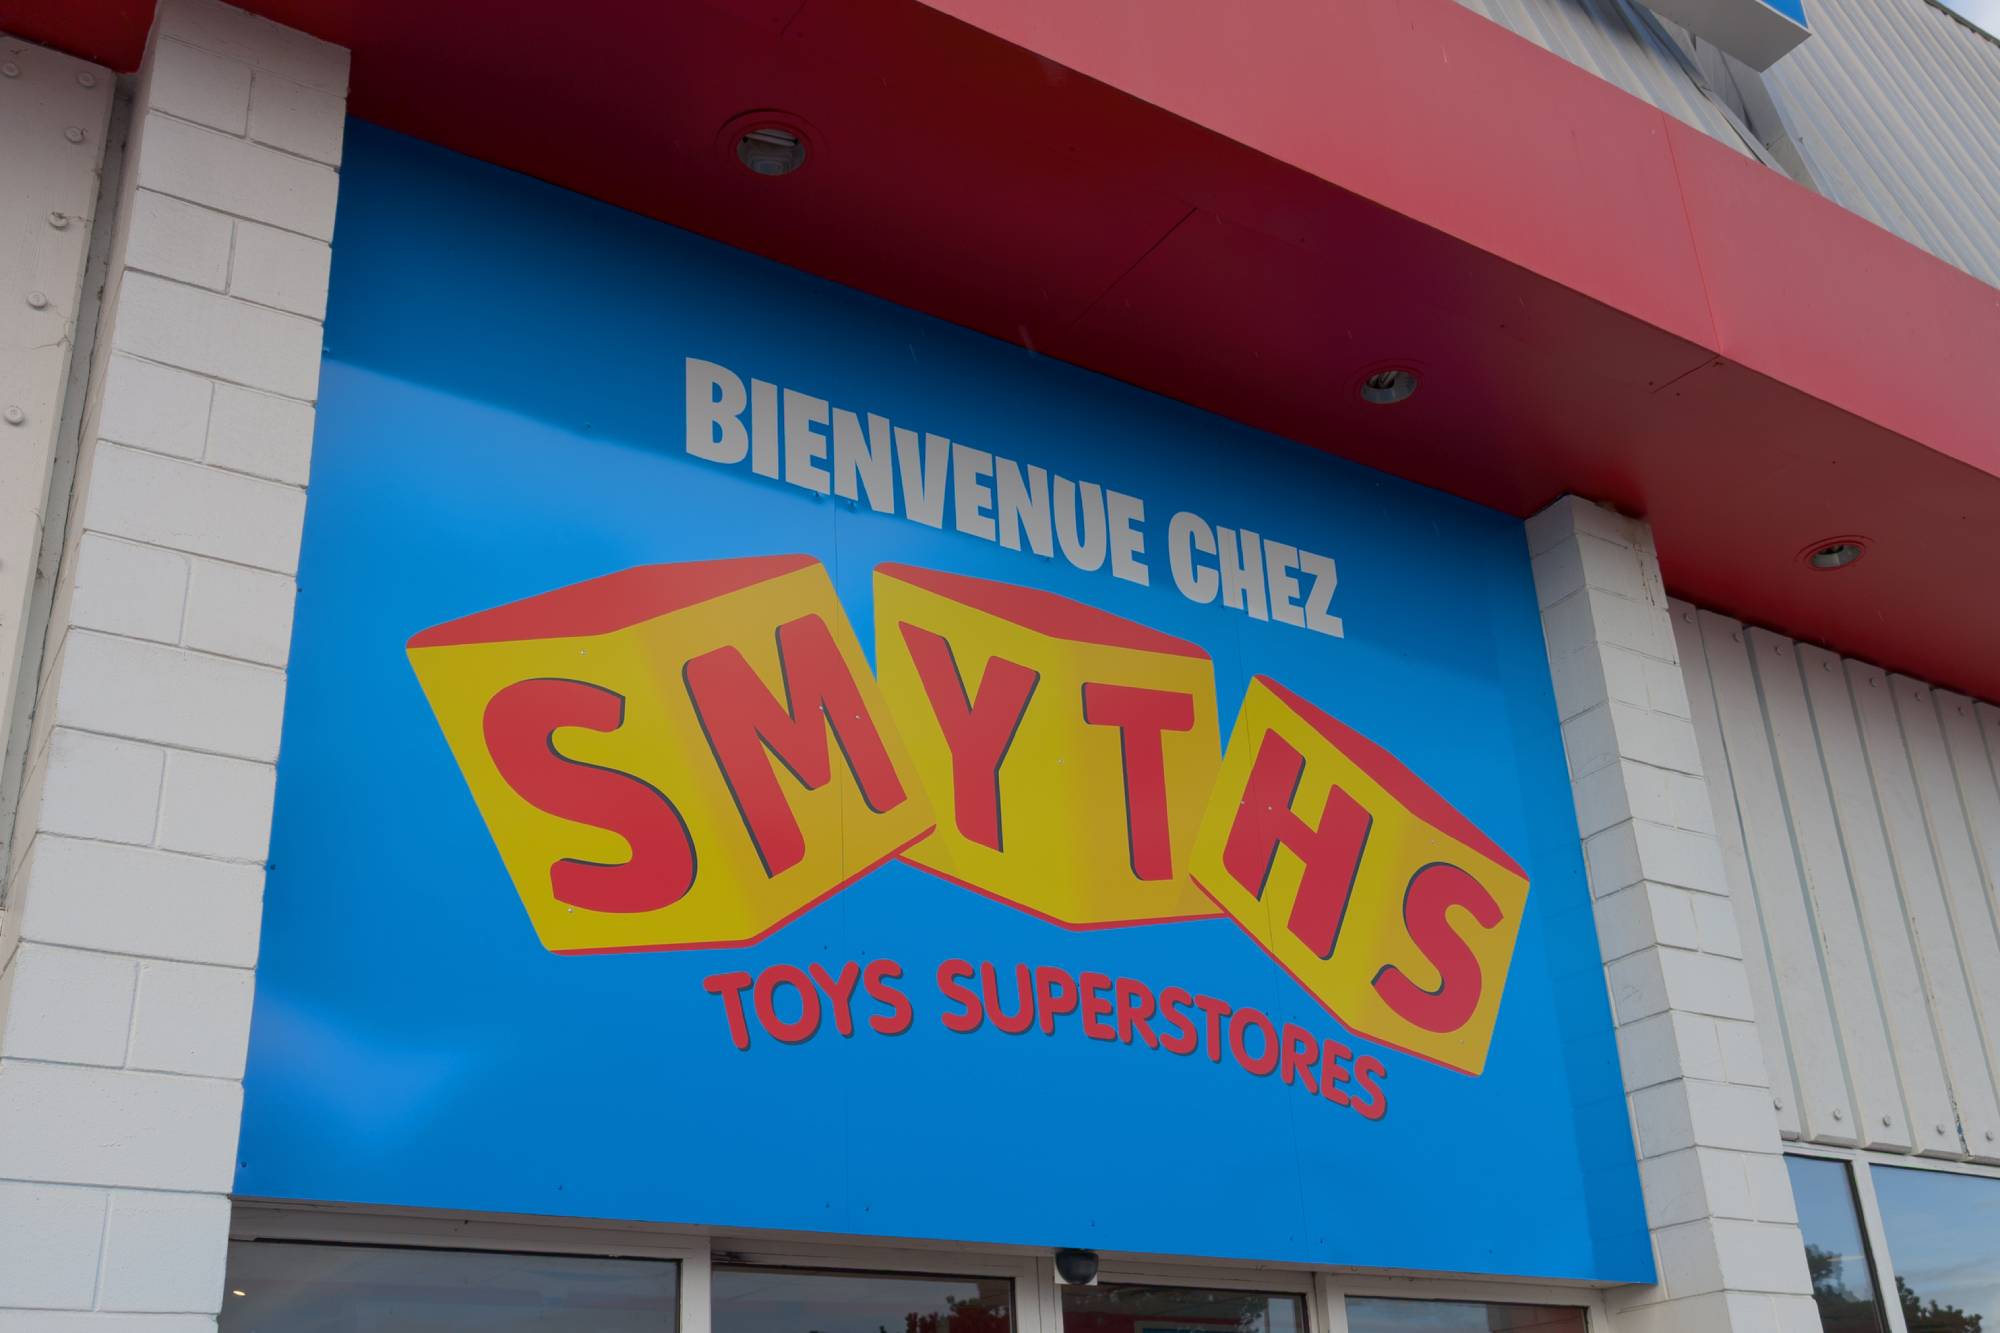 sign of a smyths toy store in France